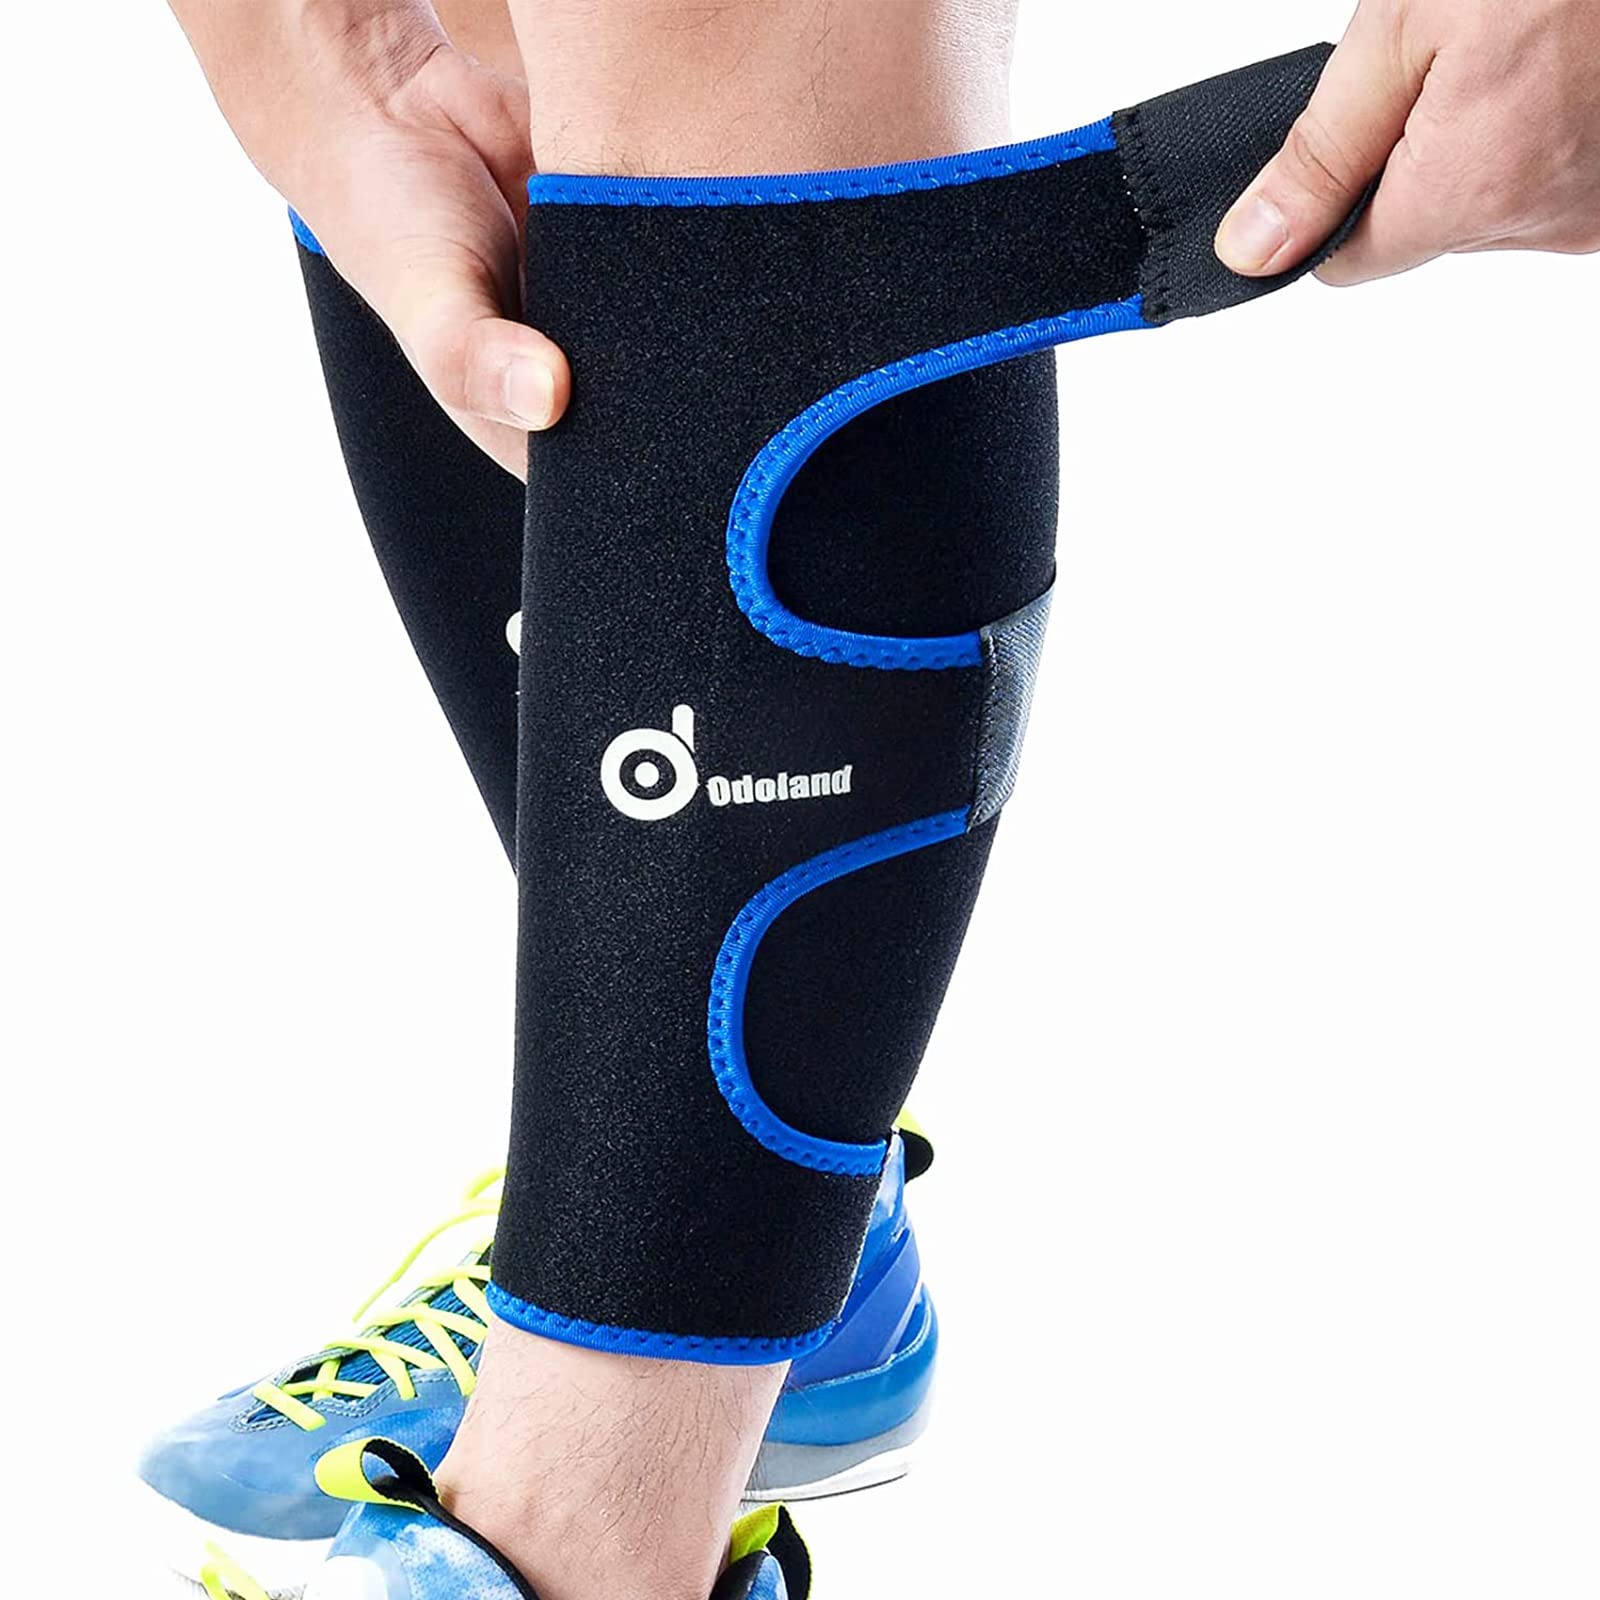 Sports Recovery Compression Full Leg Sleeves (Medium, Blue) 